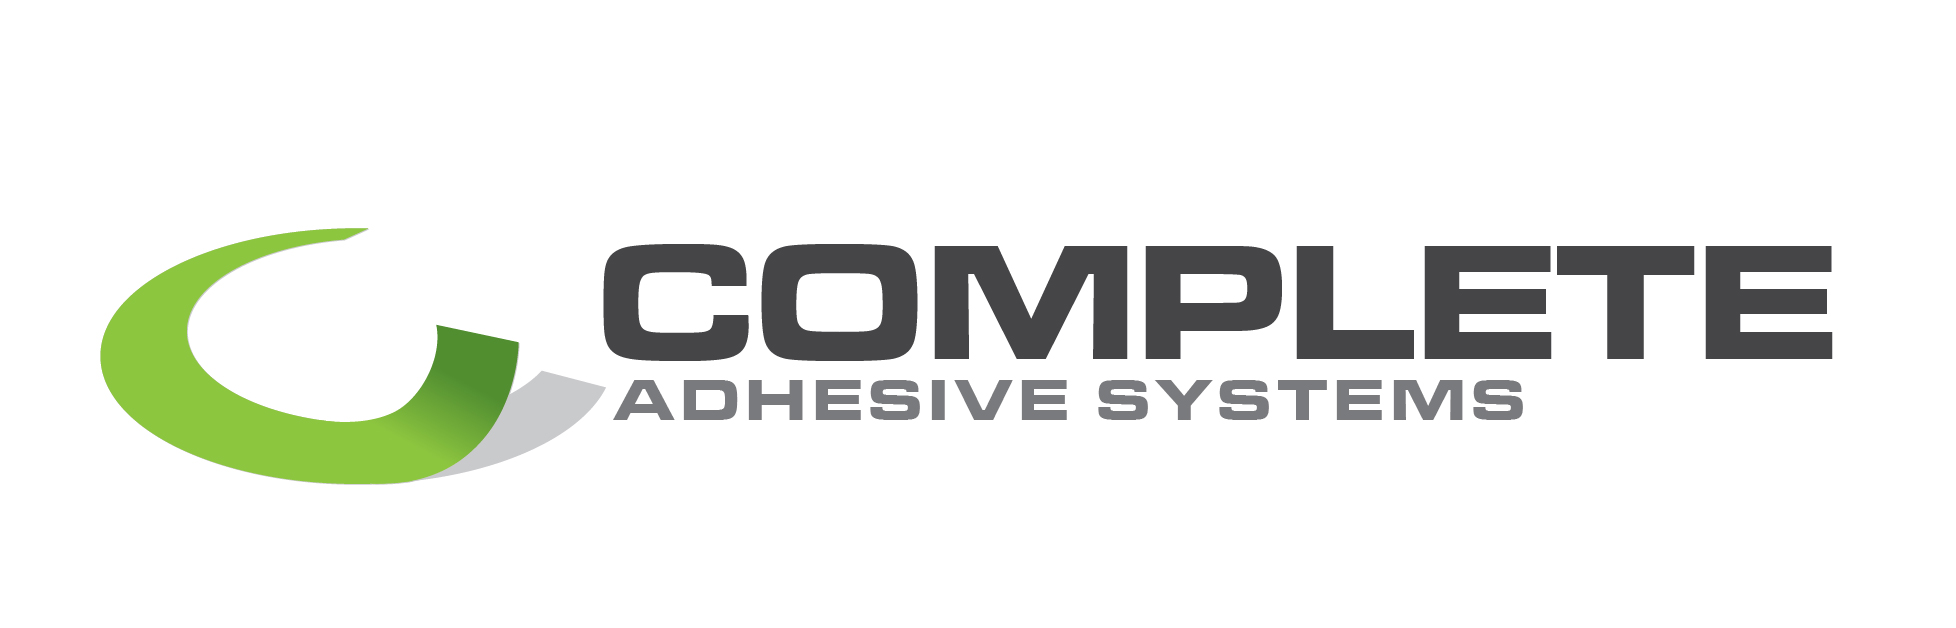 Complete Adhesive Systems